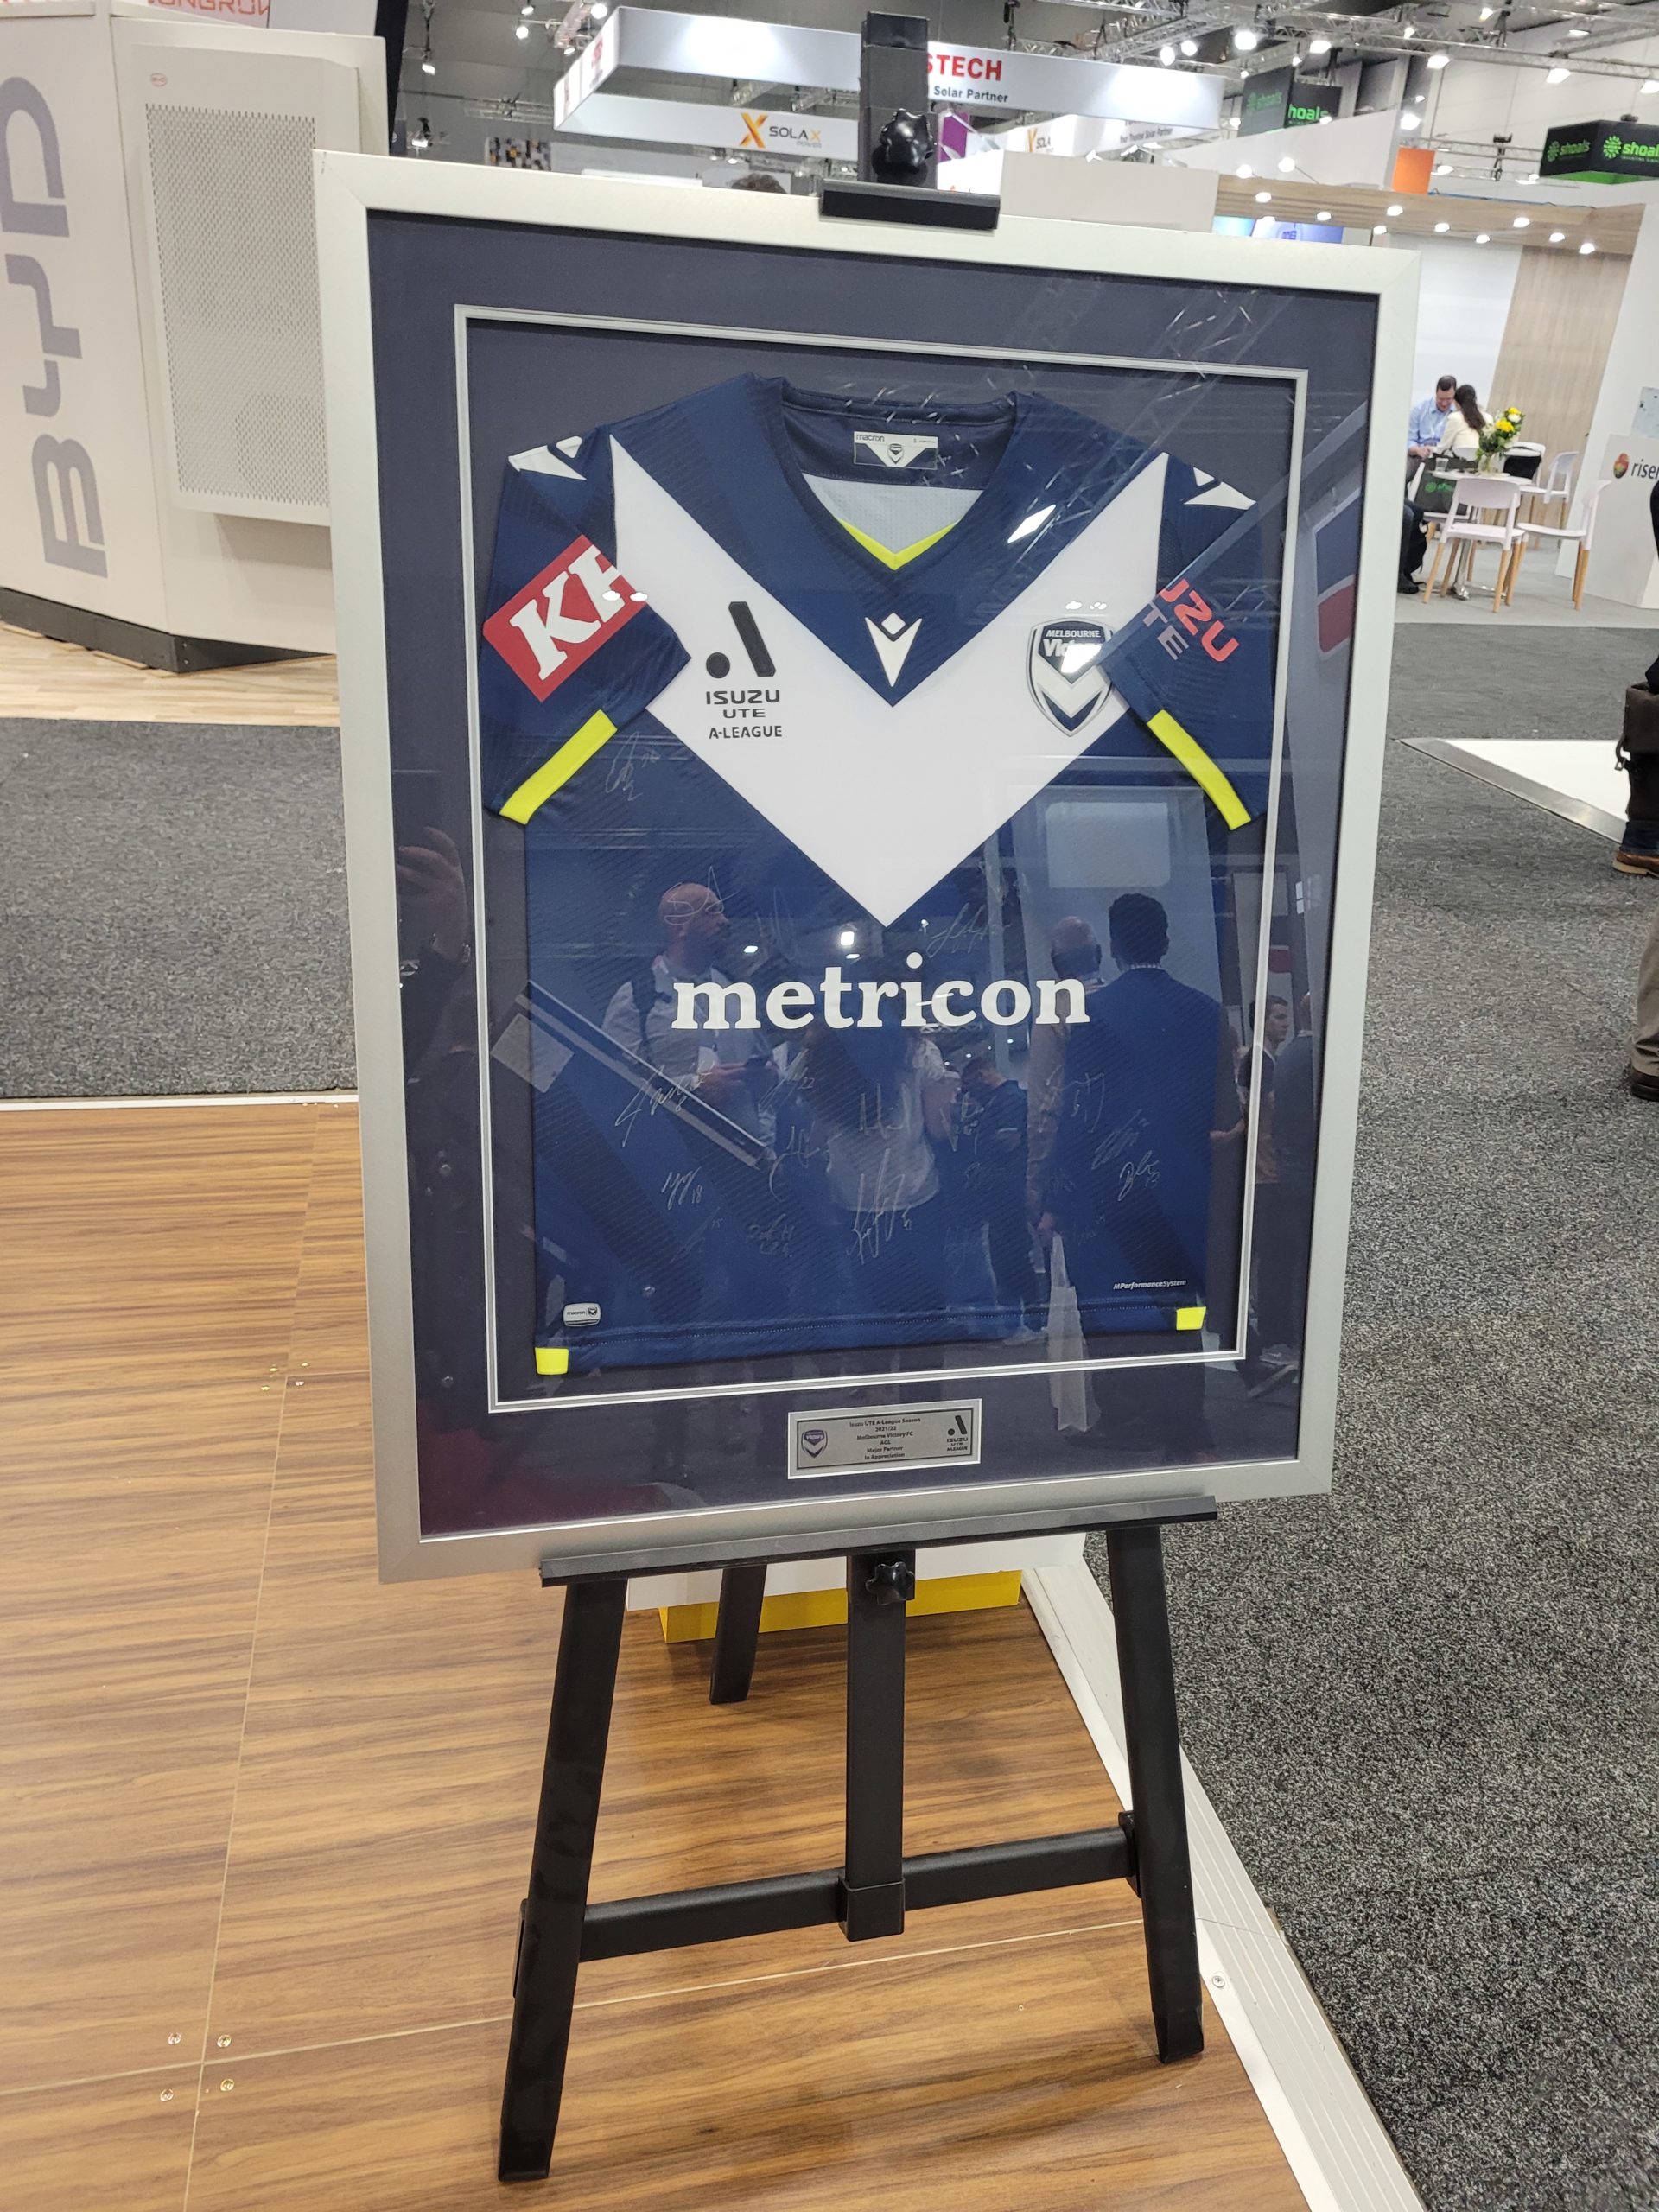 ENDED: Win a Melbourne Victory Jersey – Visit us in our booth (N123) at All-Energy Australia 2022